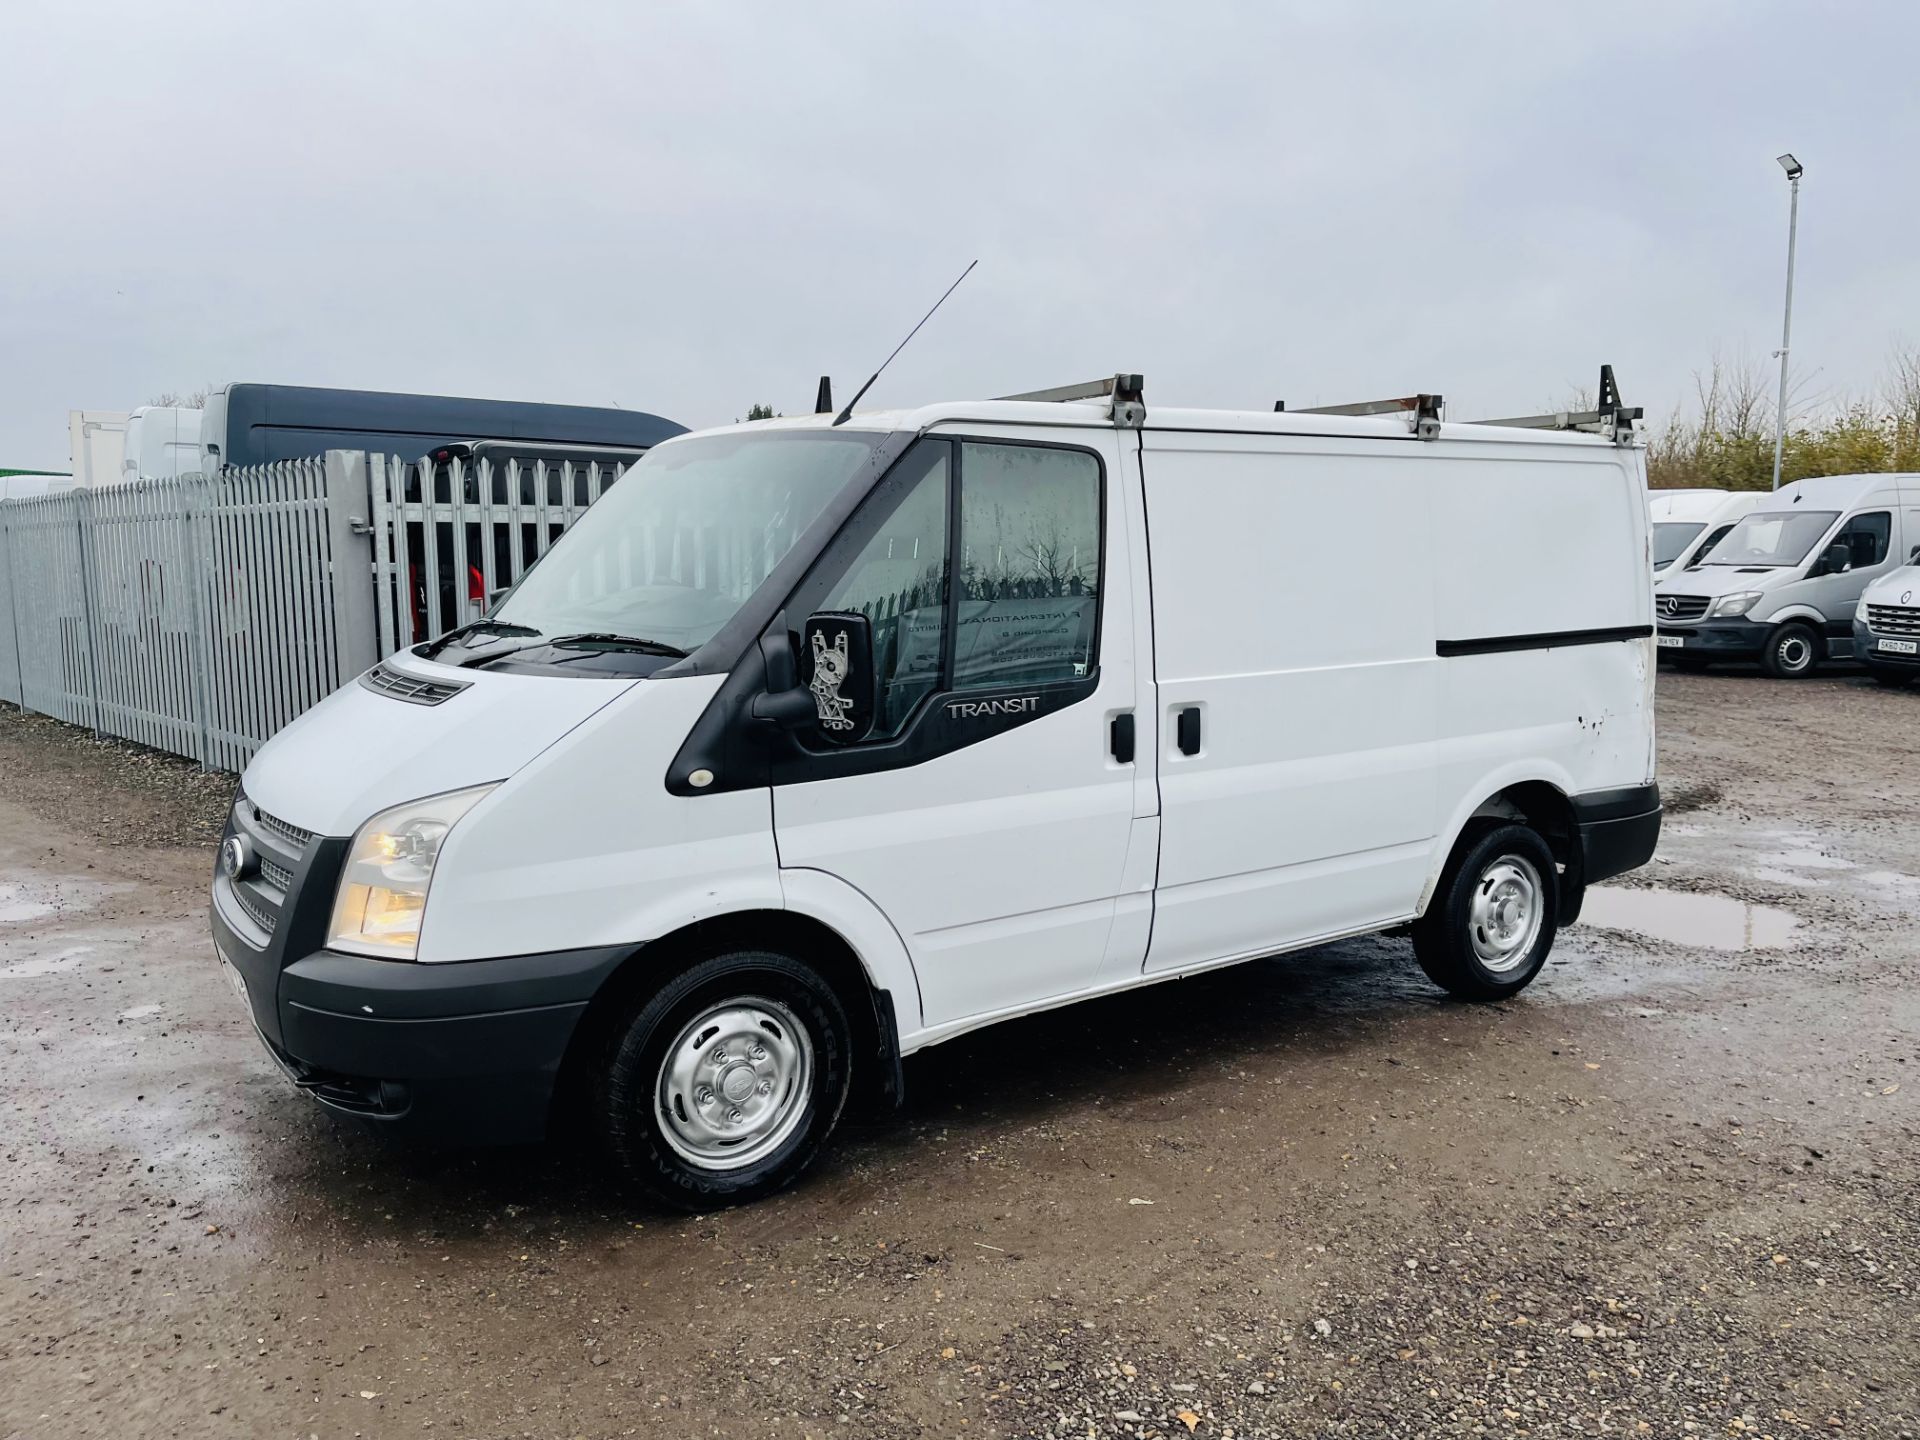 ** ON SALE ** Ford Transit 2.2 TDCI 100 FWD L1 H1 2013 '13 Reg' - Air con - No Vat Save 20% - Image 6 of 21